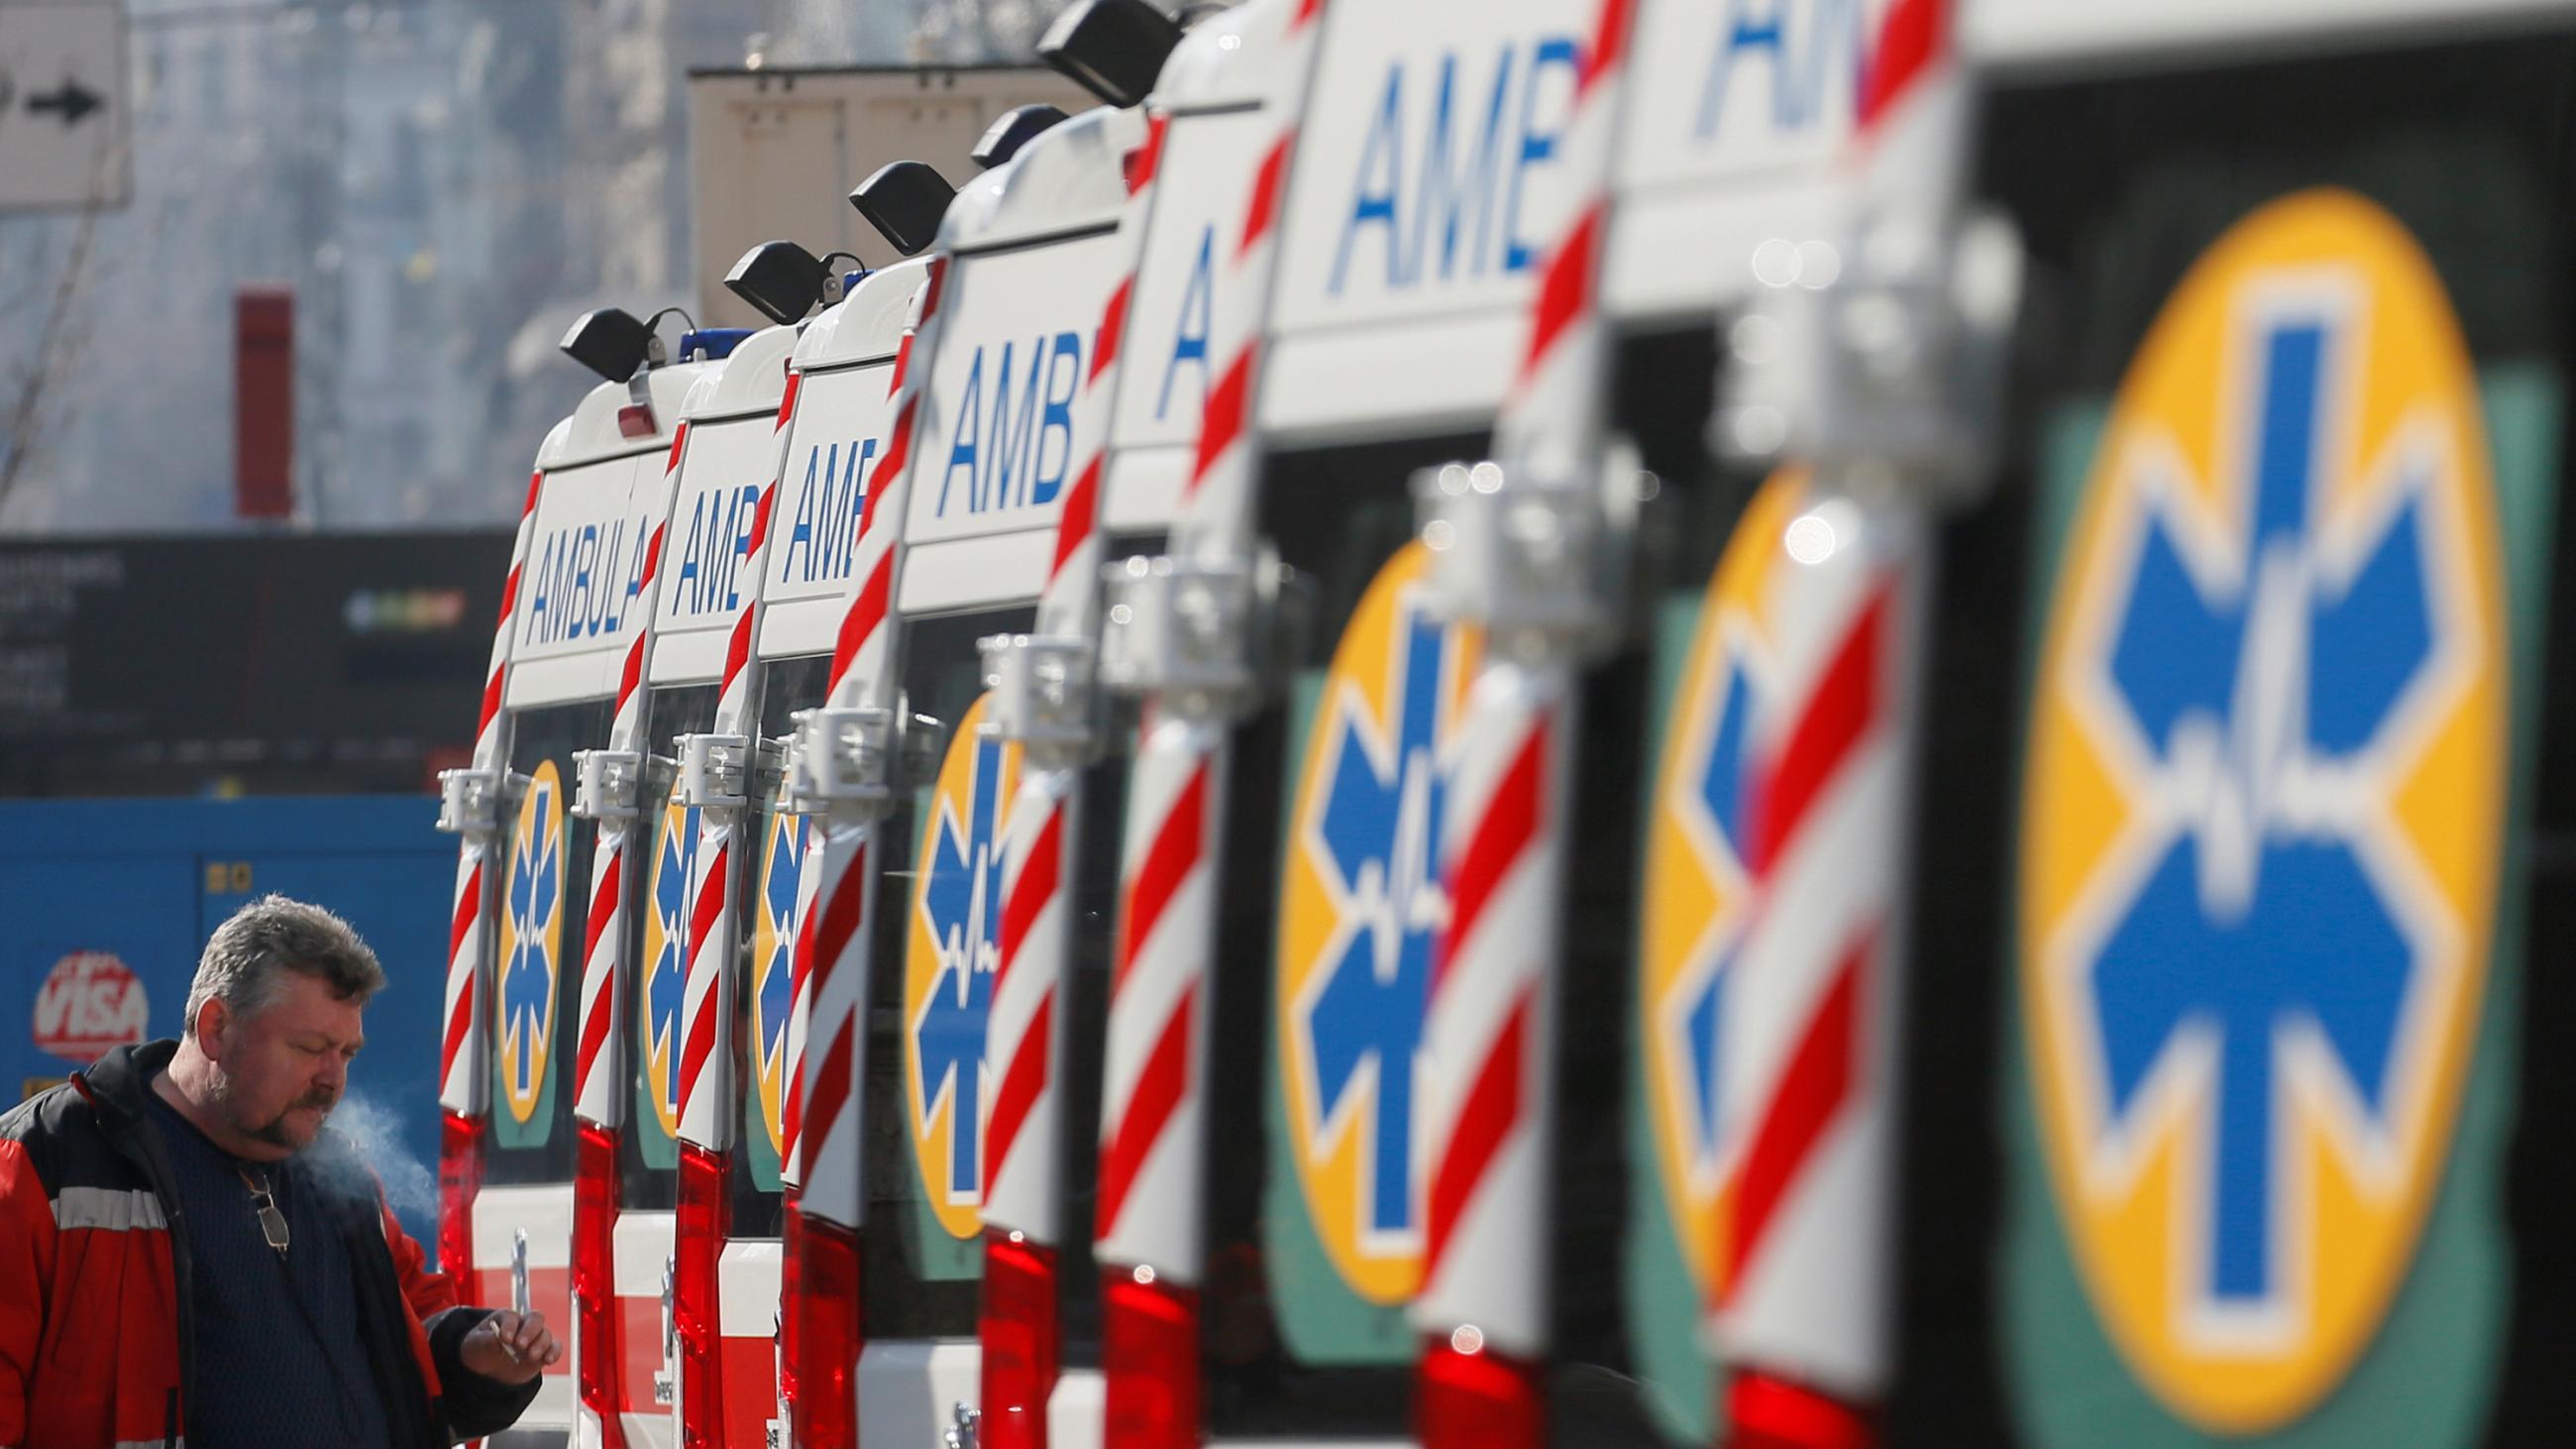 The photo shows a long line of ambulances with a worker at the end puffing on a cigarette. 